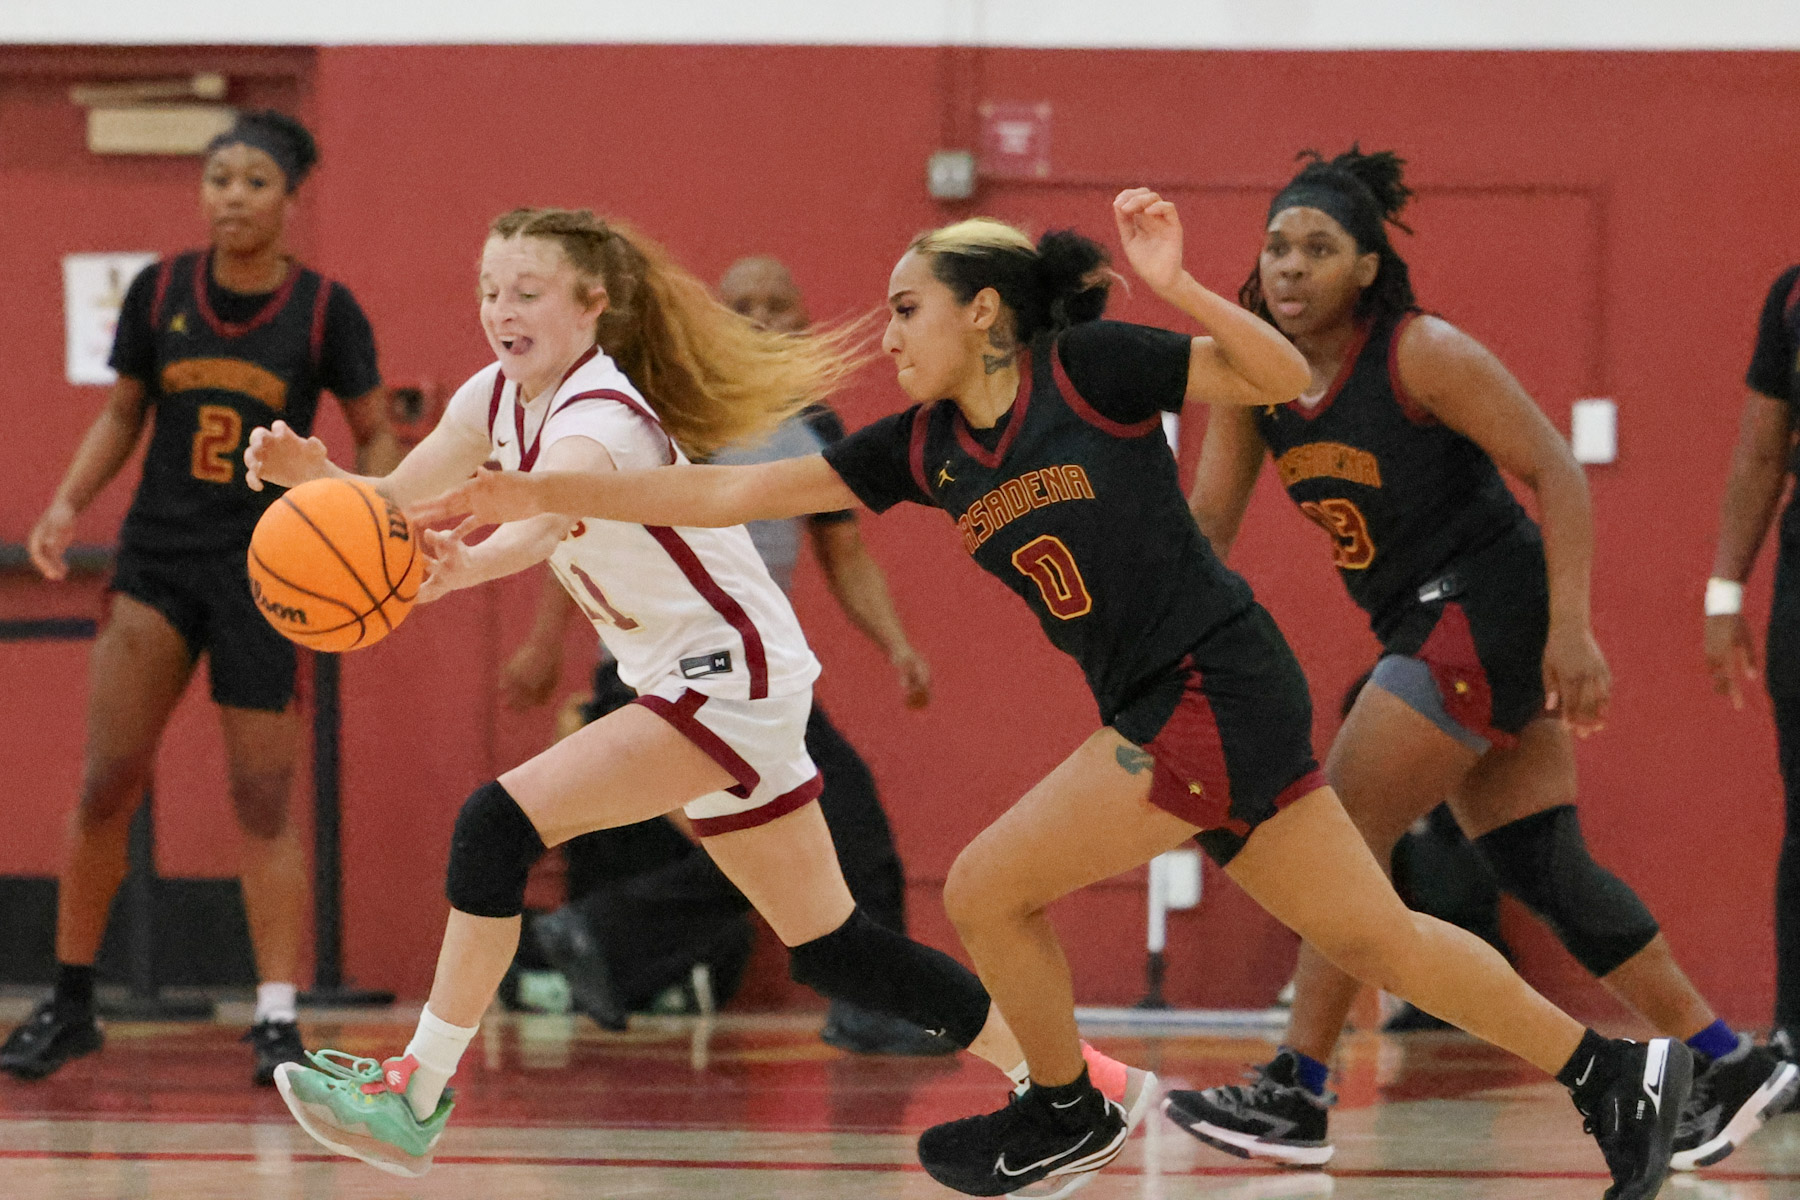 Vanessa Epperson makes the steal during PCC's playoff defeat on Saturday (photo and gallery by Richard Quinton).